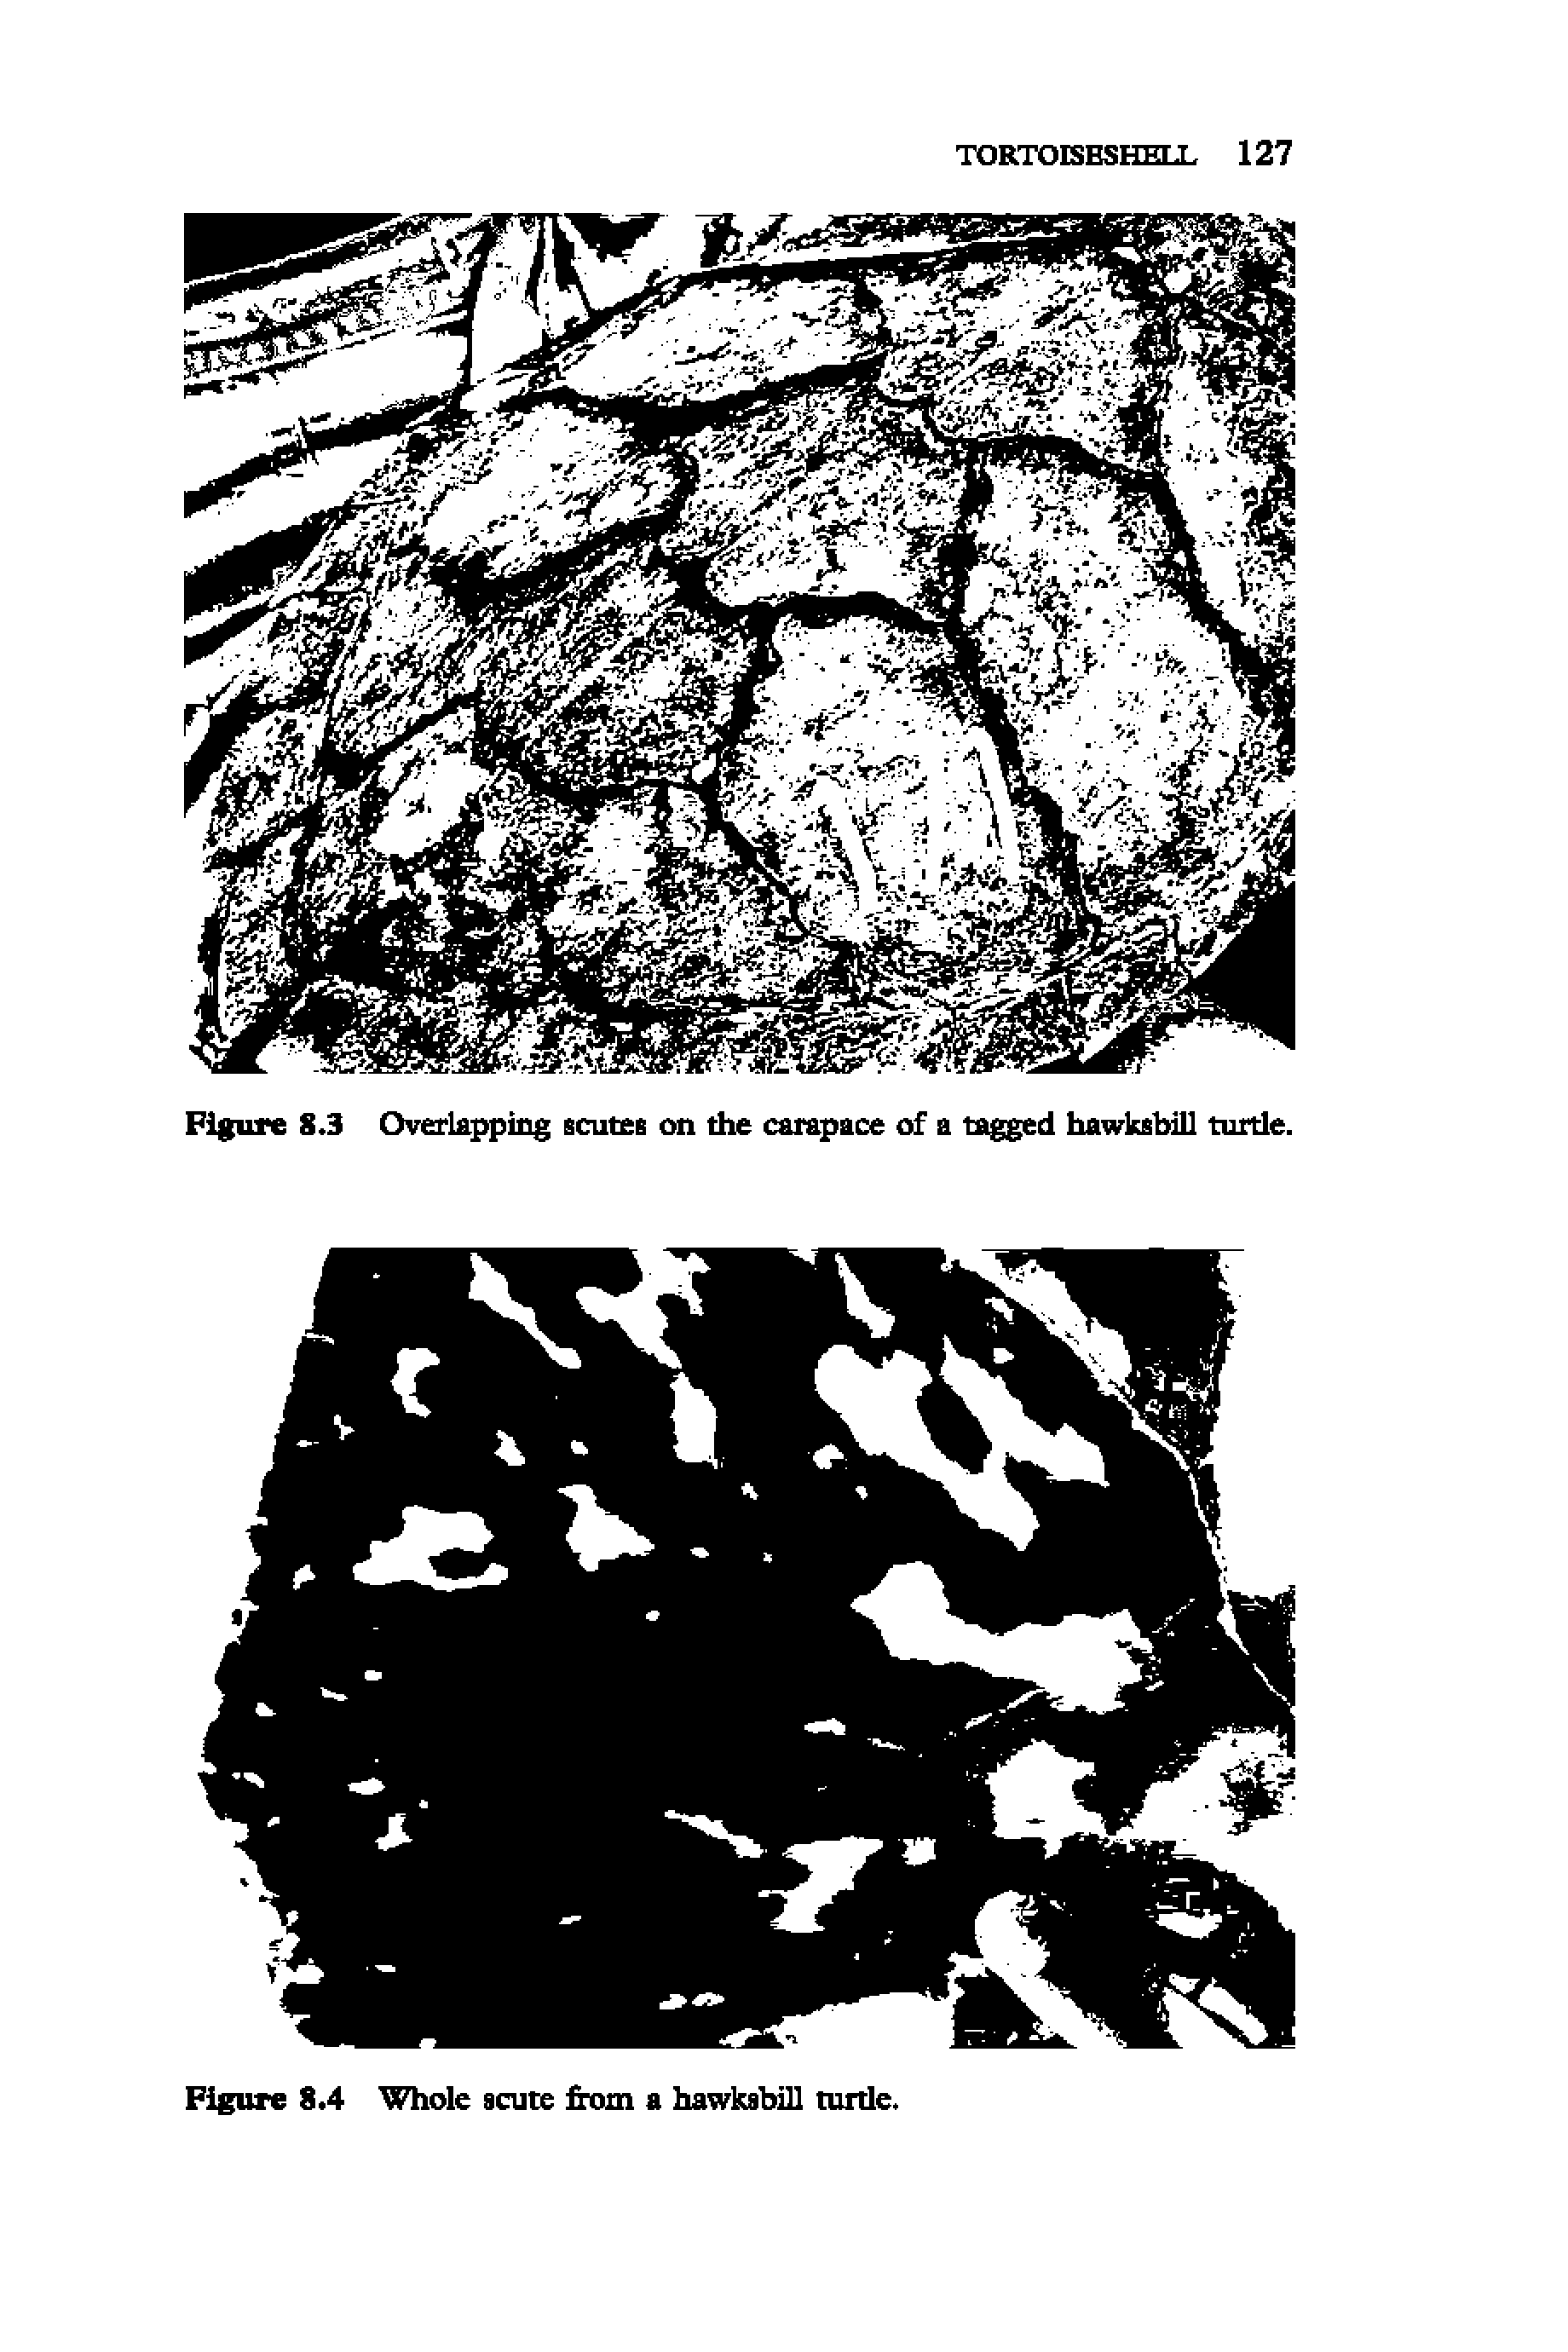 Figure 8.3 Overlapping scutes on the carapace of a u ged hawksbill turtle.